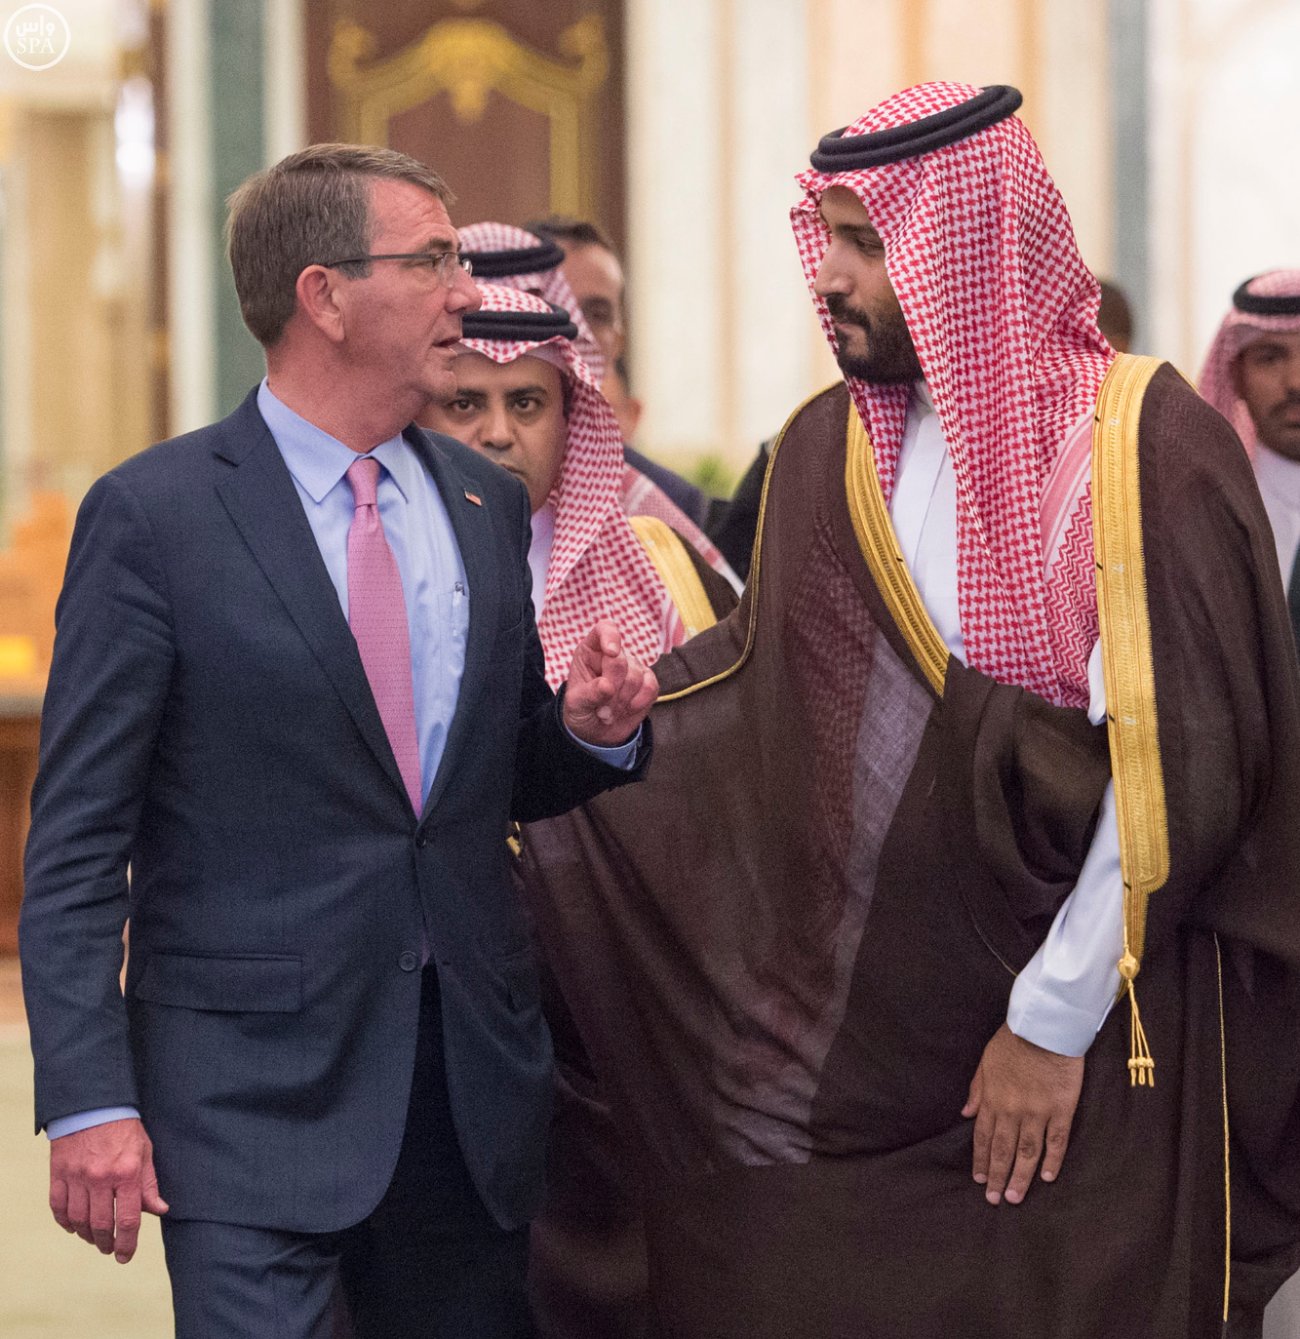 Secretary of Defense Ash Carter meets with Deputy Crown Prince and Minister of Defense Mohammed bin Salman.